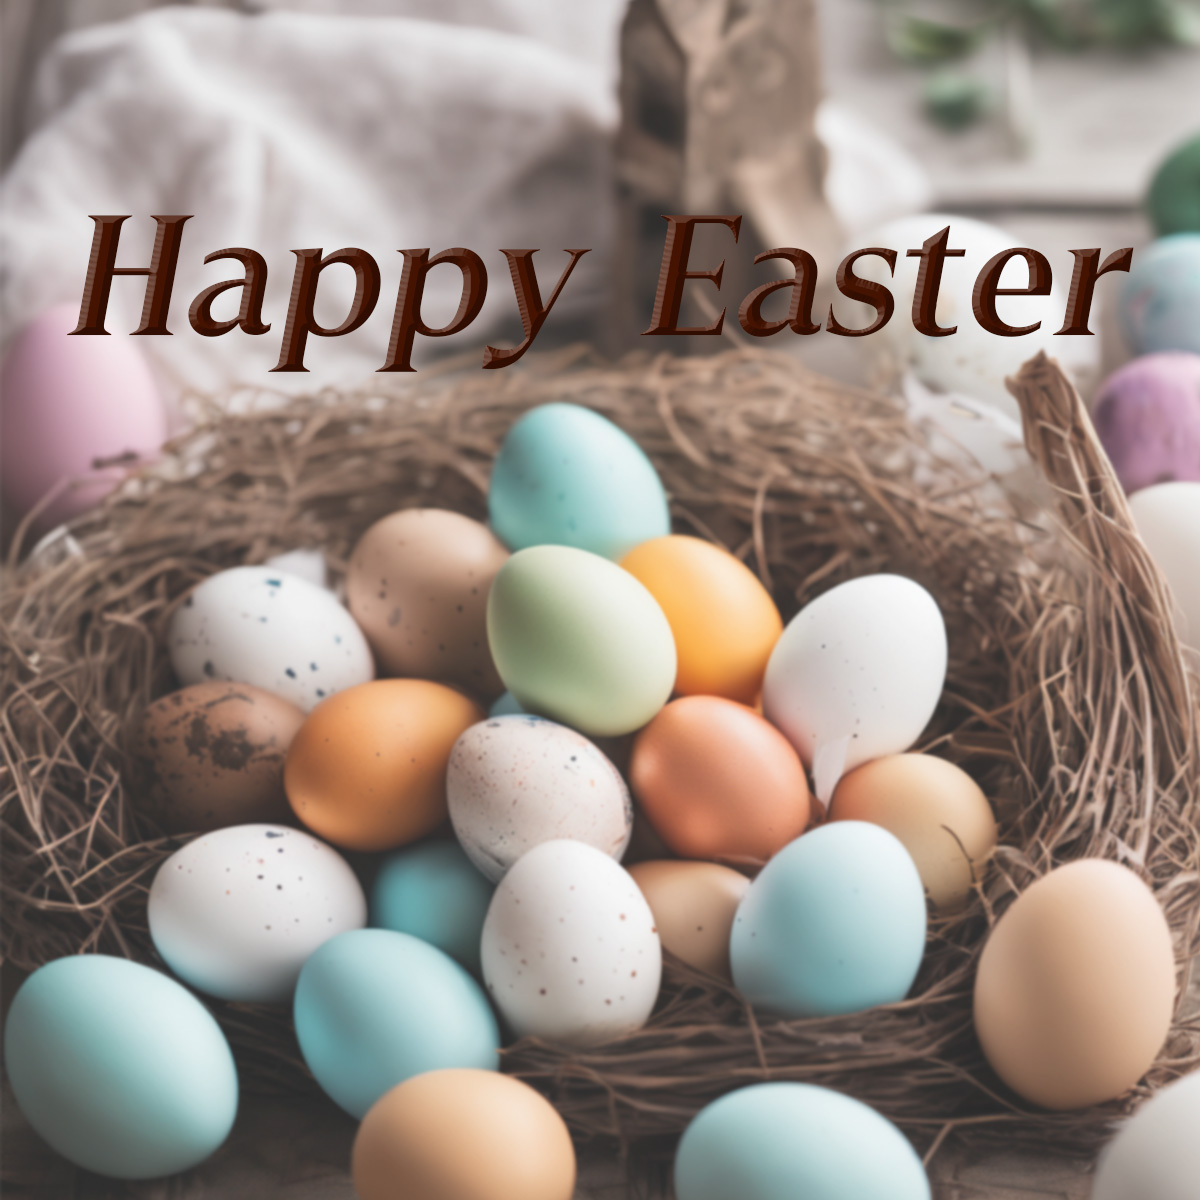 Warm wishes for a happy Easter filled with springtime sunshine and loved ones.

#avaccess #EasterJoy #ProAV #avtweeps